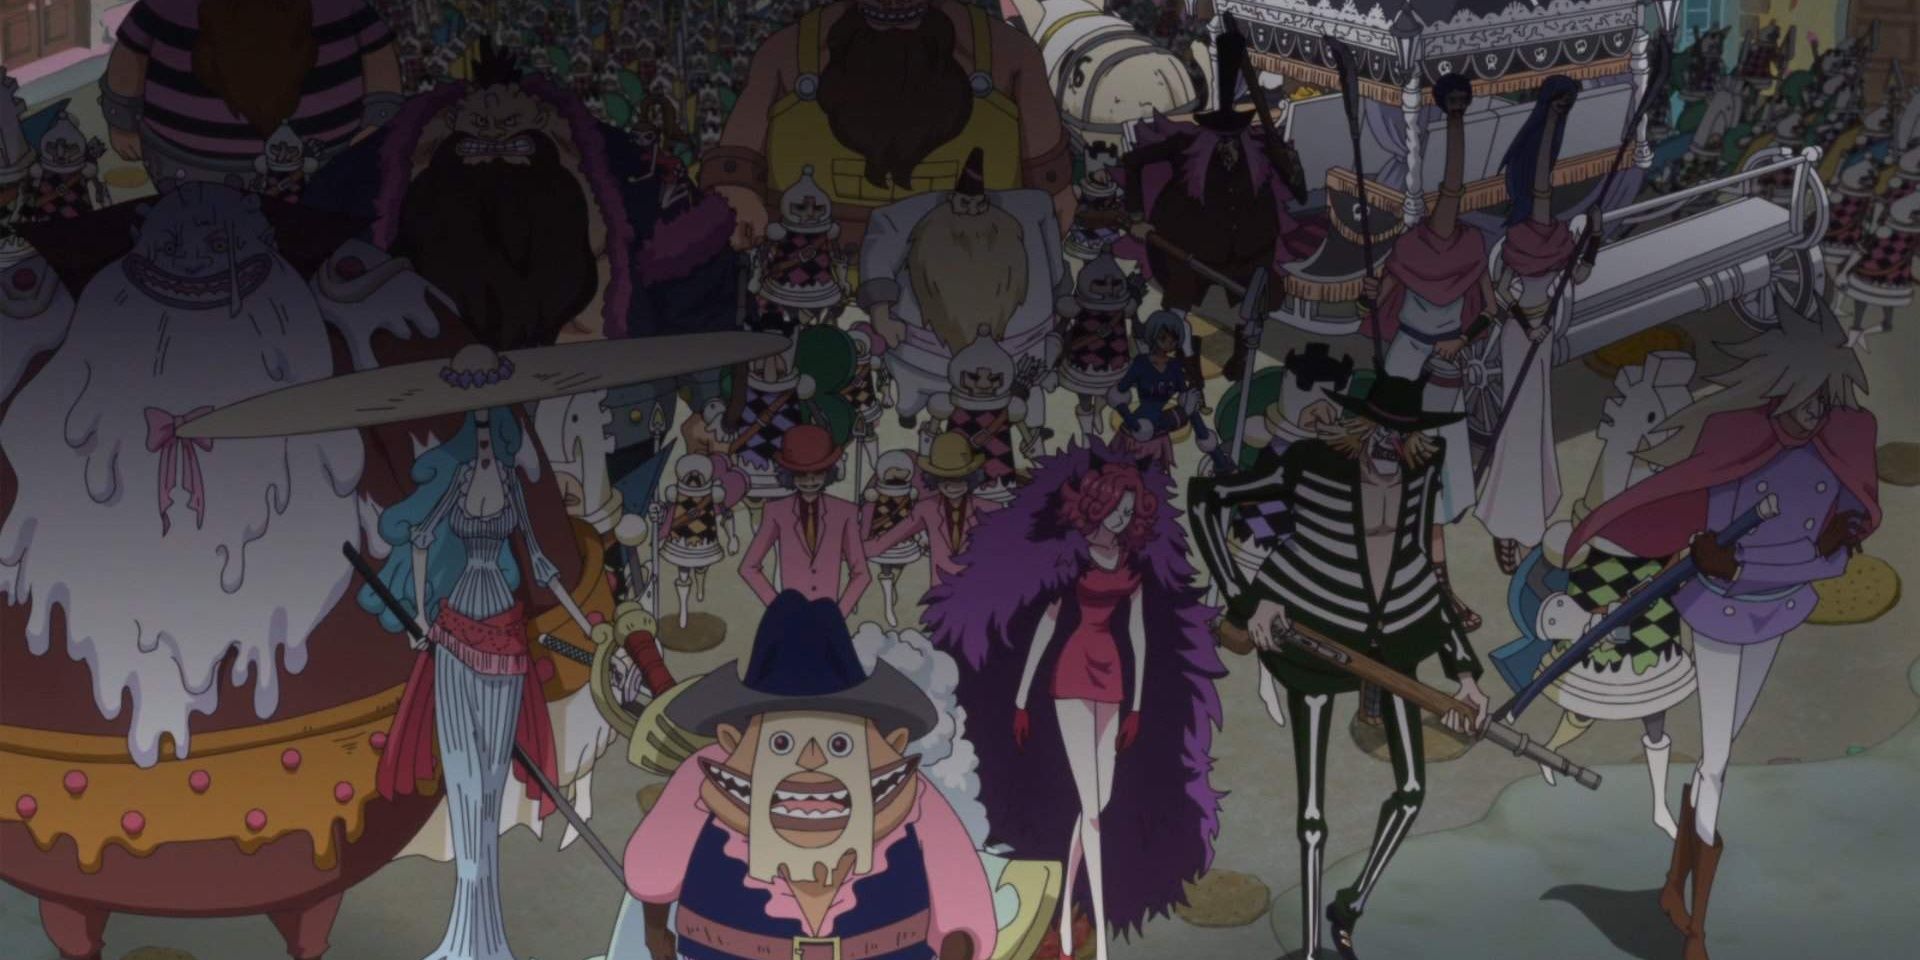 The Big Mom Pirates assemble to attack Luffy in One Piece.